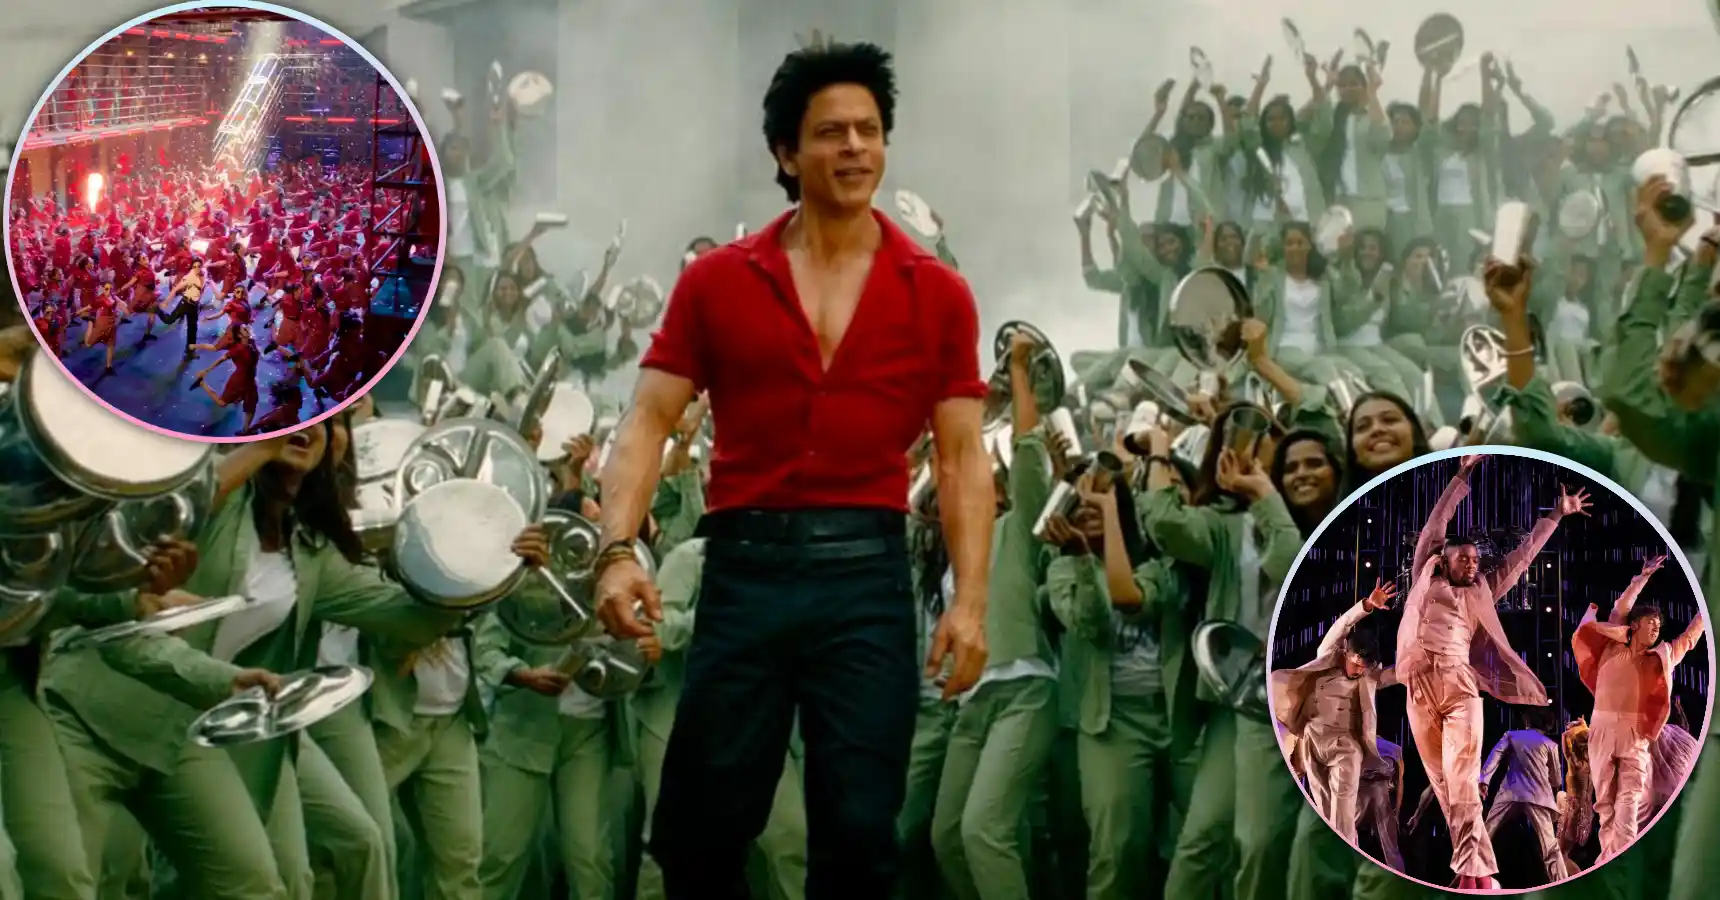 shah rukh khan much awaited film song is ready to release